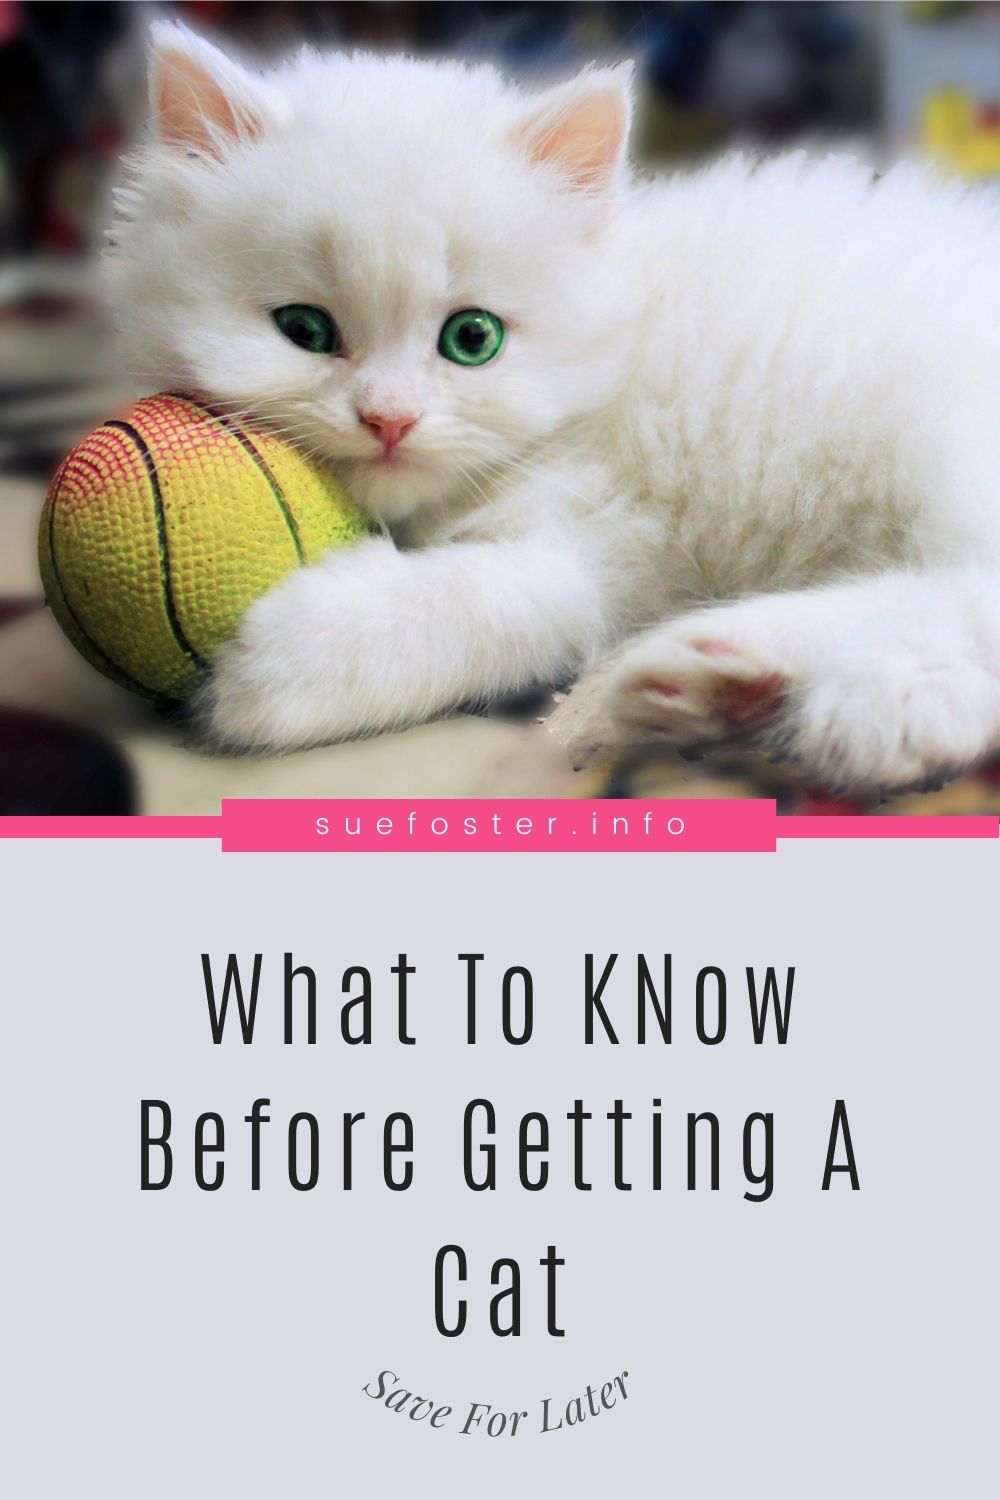 If you want to find out more about getting a cat or if you want to give your decision some more thought then you can find some important pointers in this post.